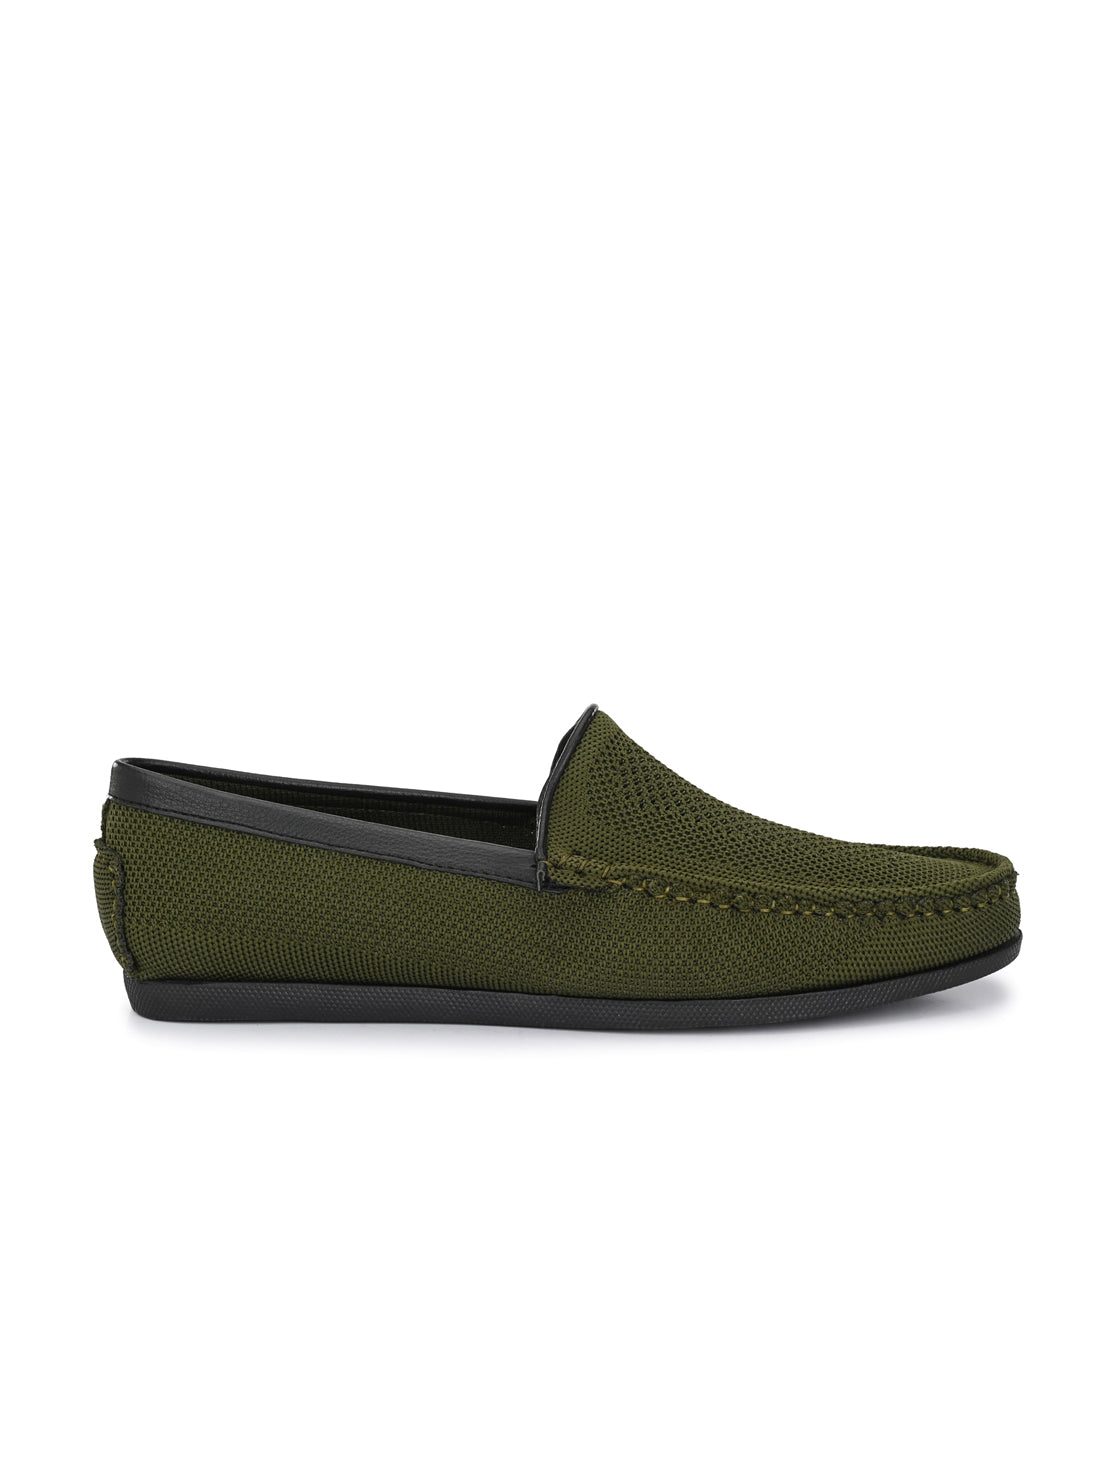 Guava Men's Olive Knitted Slip On Driving Loafers (GV15JA761)